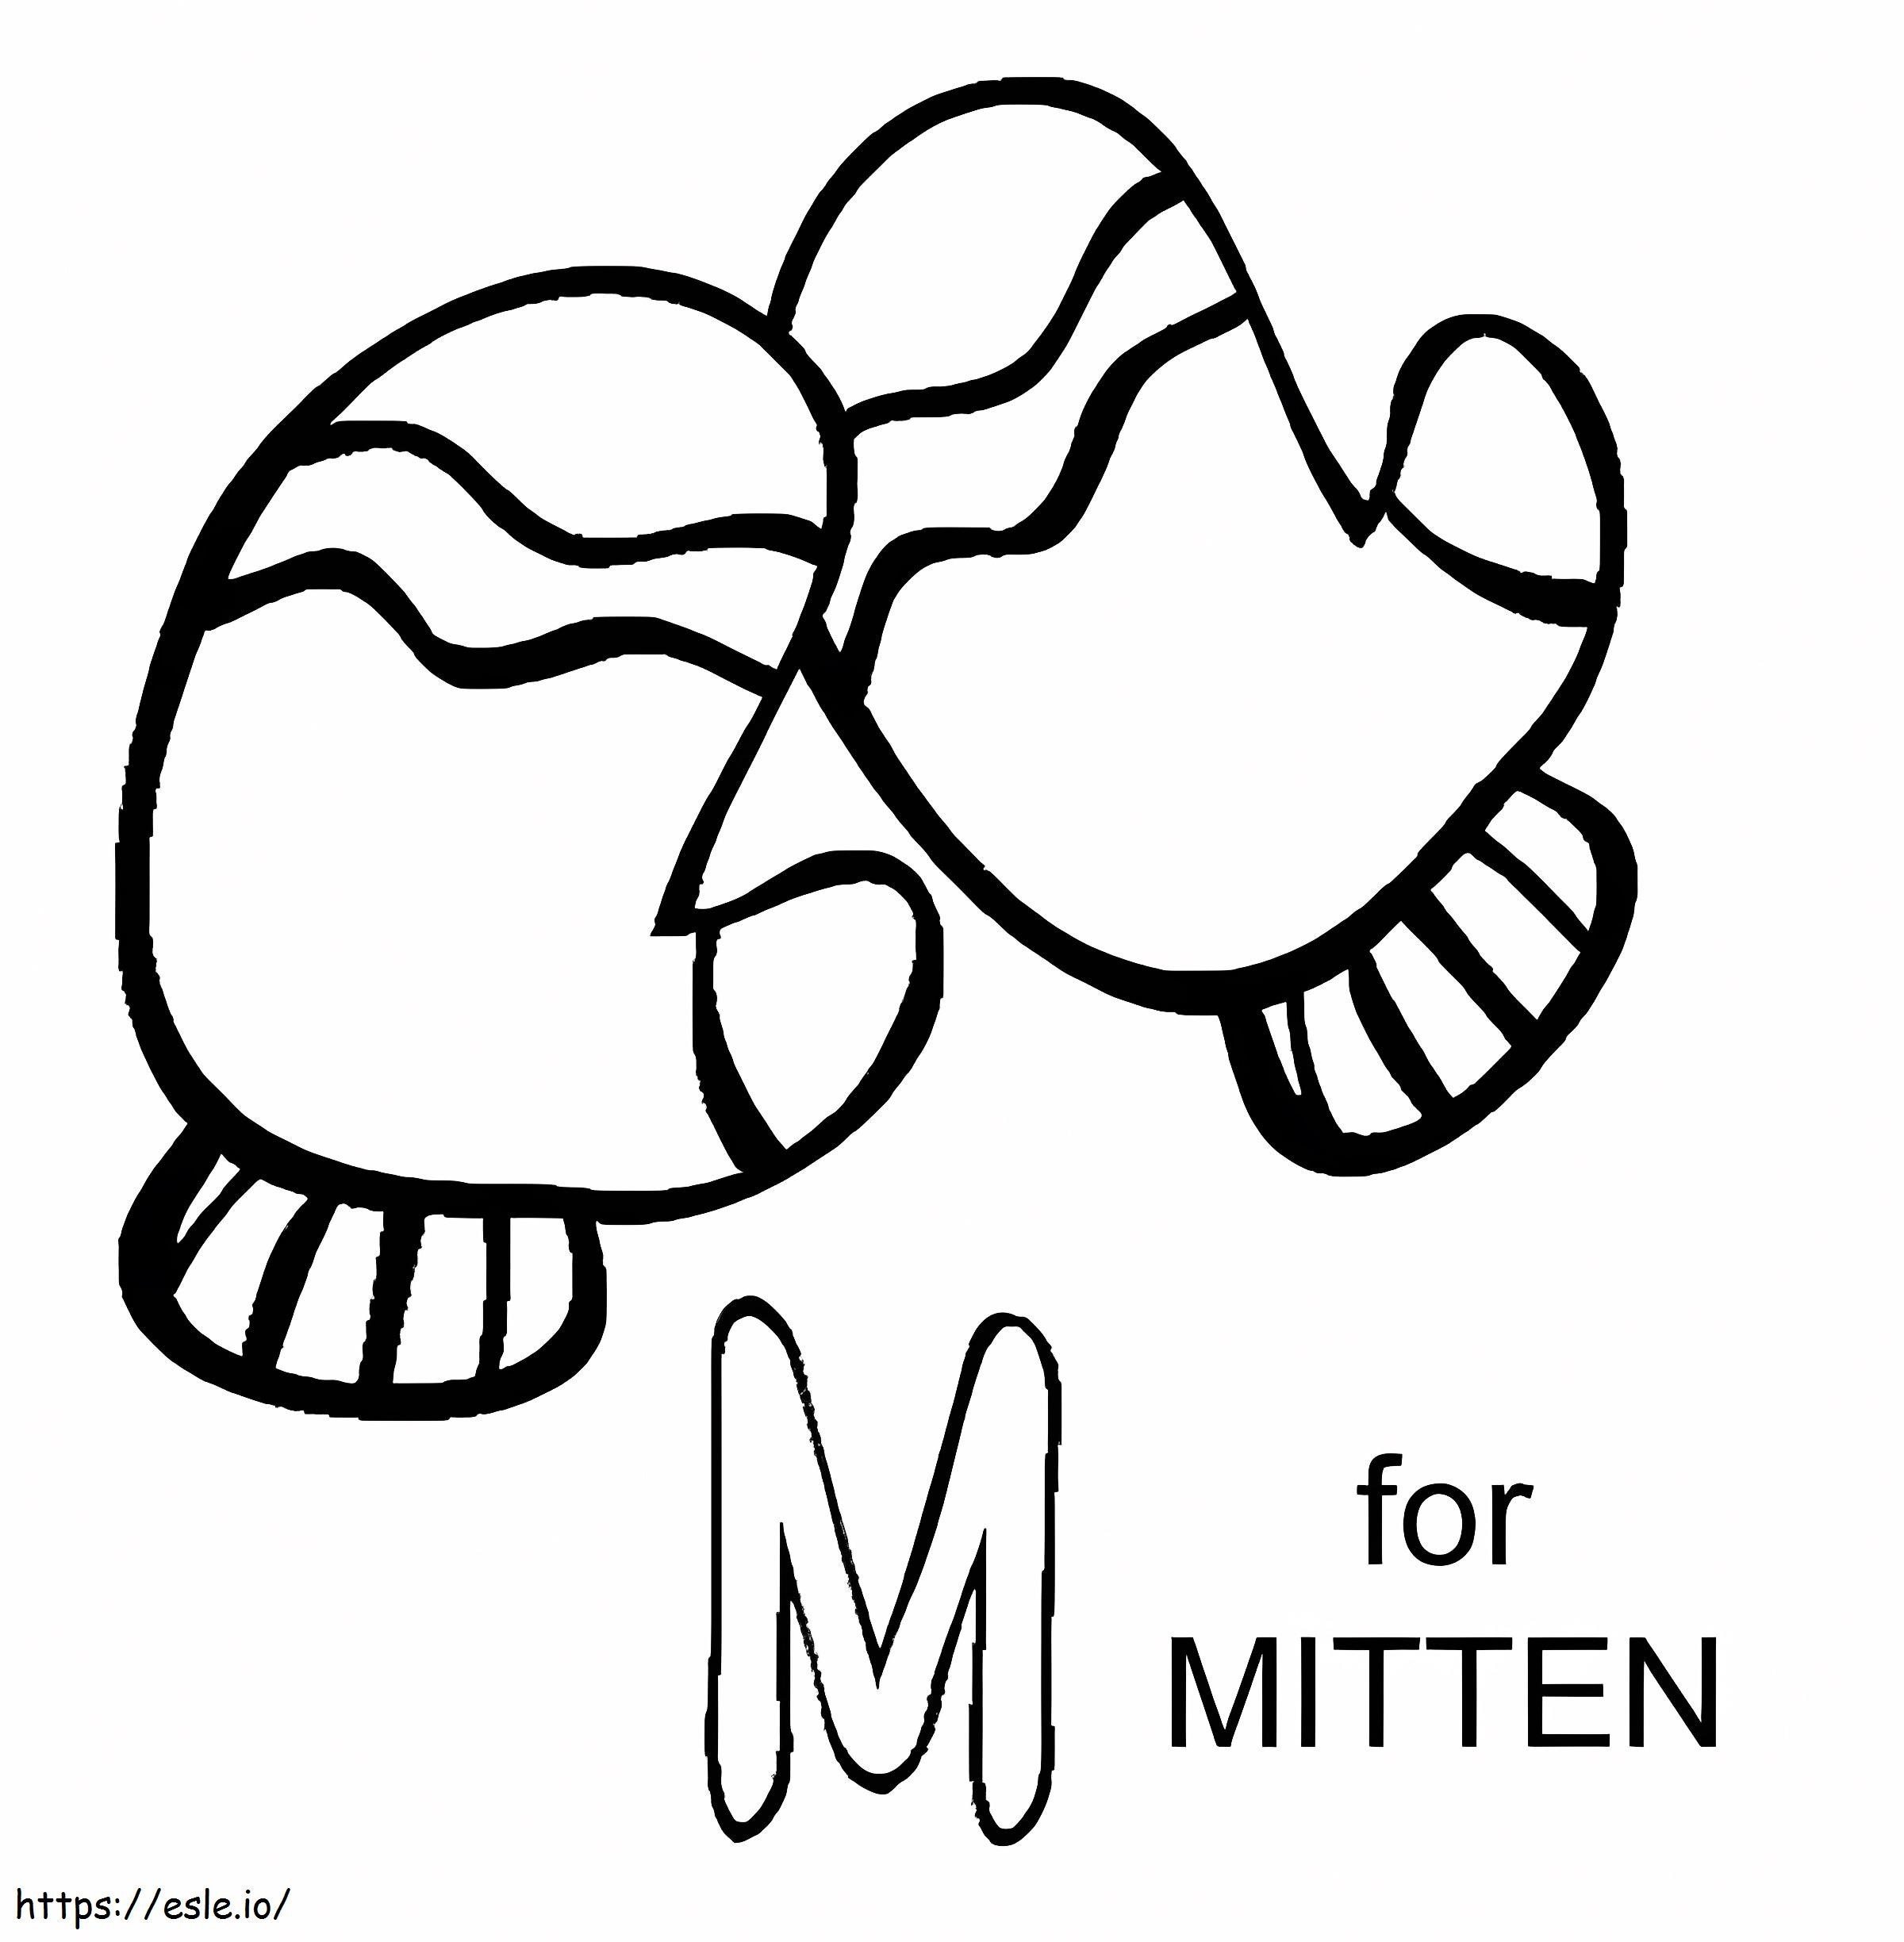 Mittens Printable coloring page